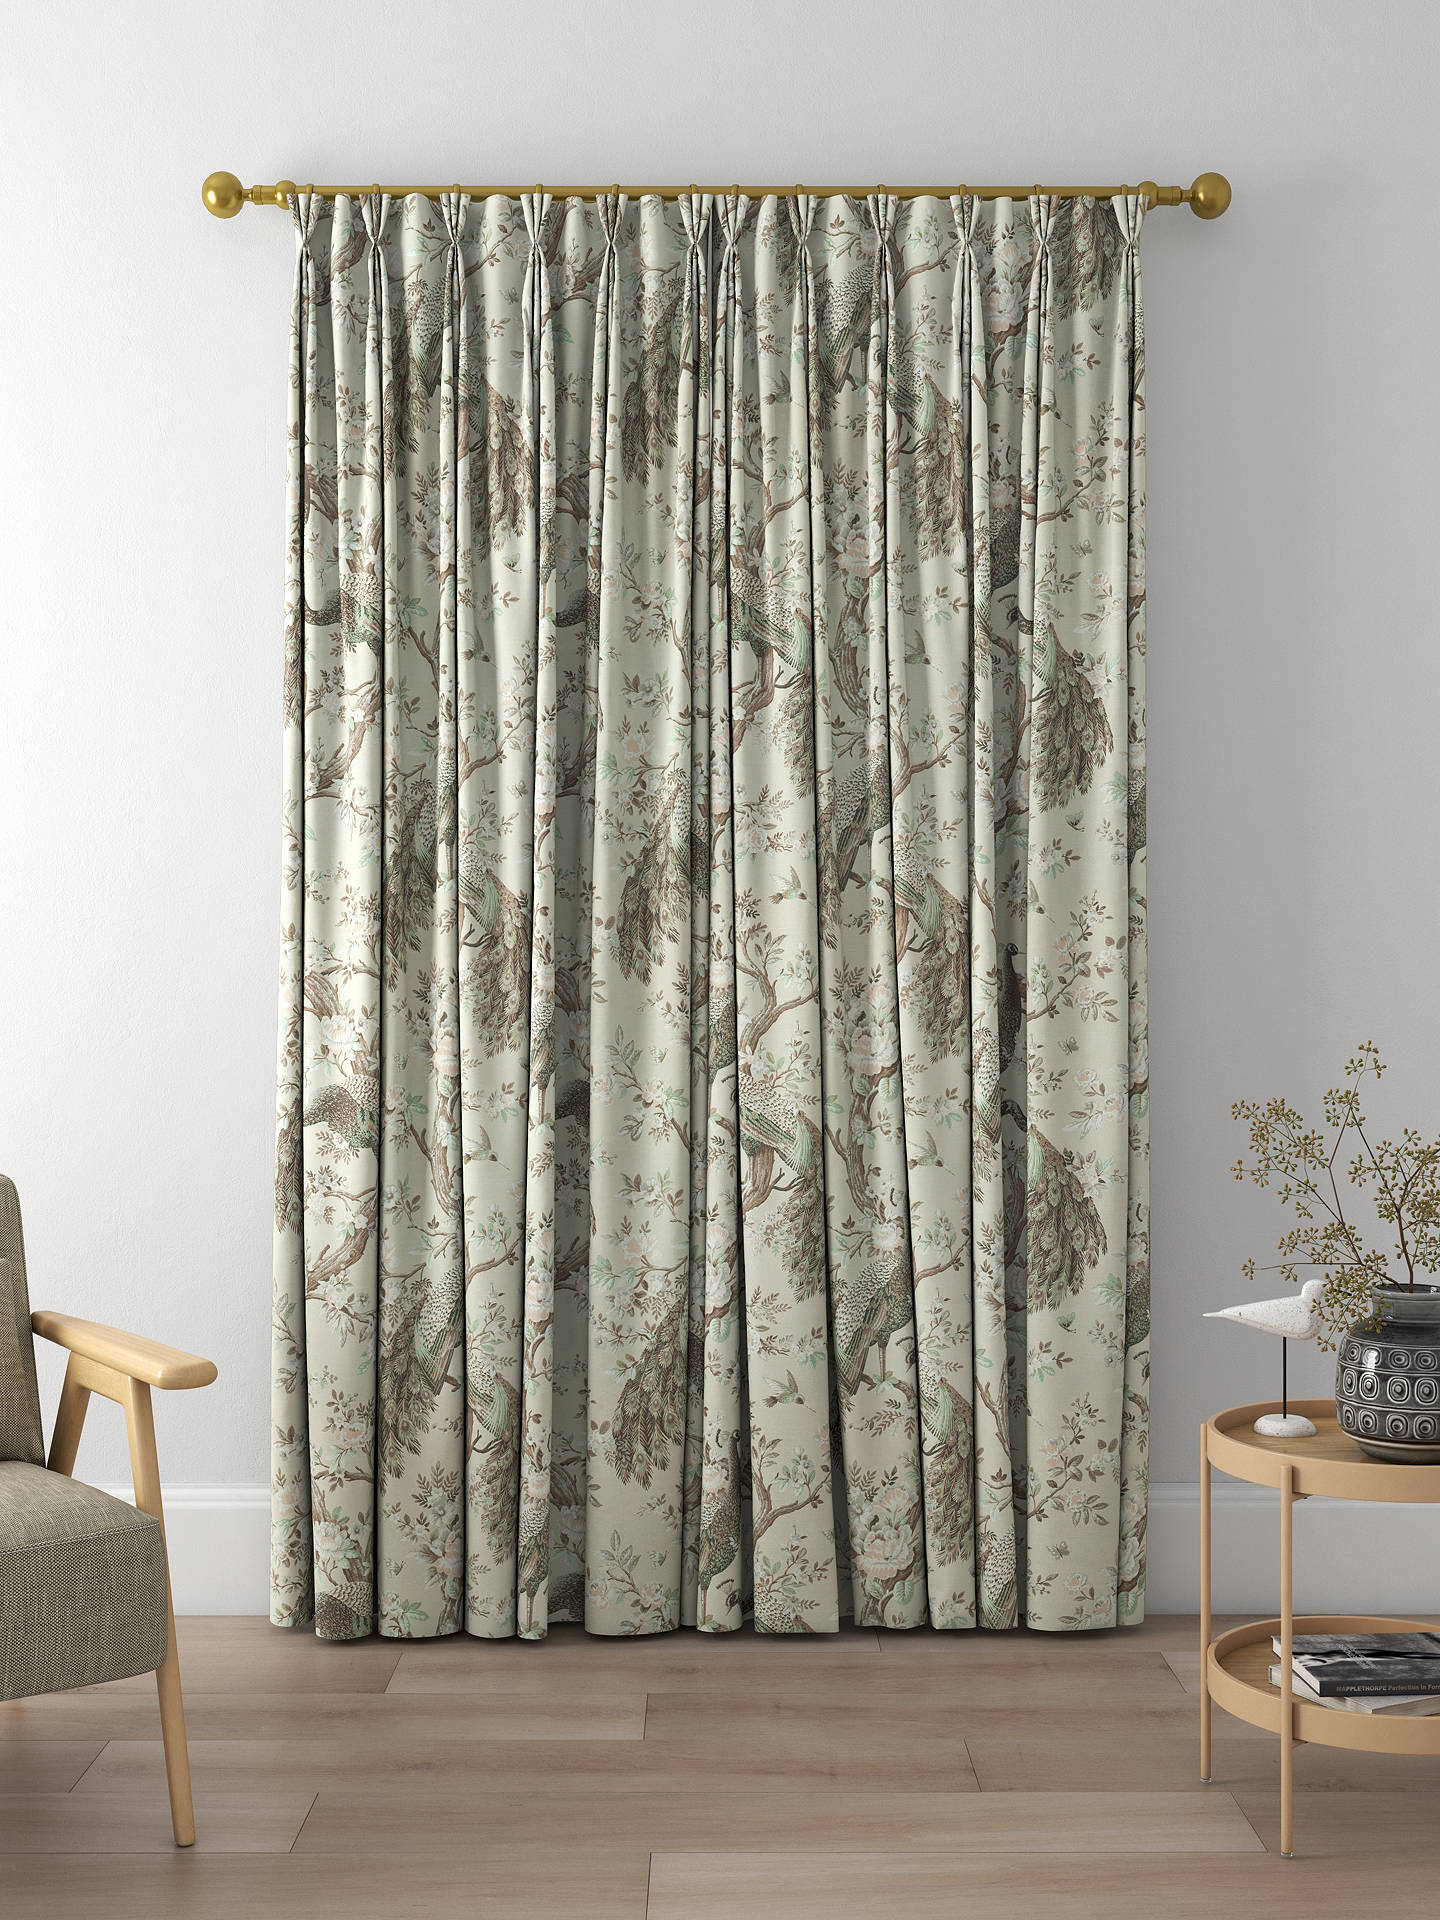 Laura Ashley Belvedere Made to Measure Curtains or Roman Bilnd, Truffle